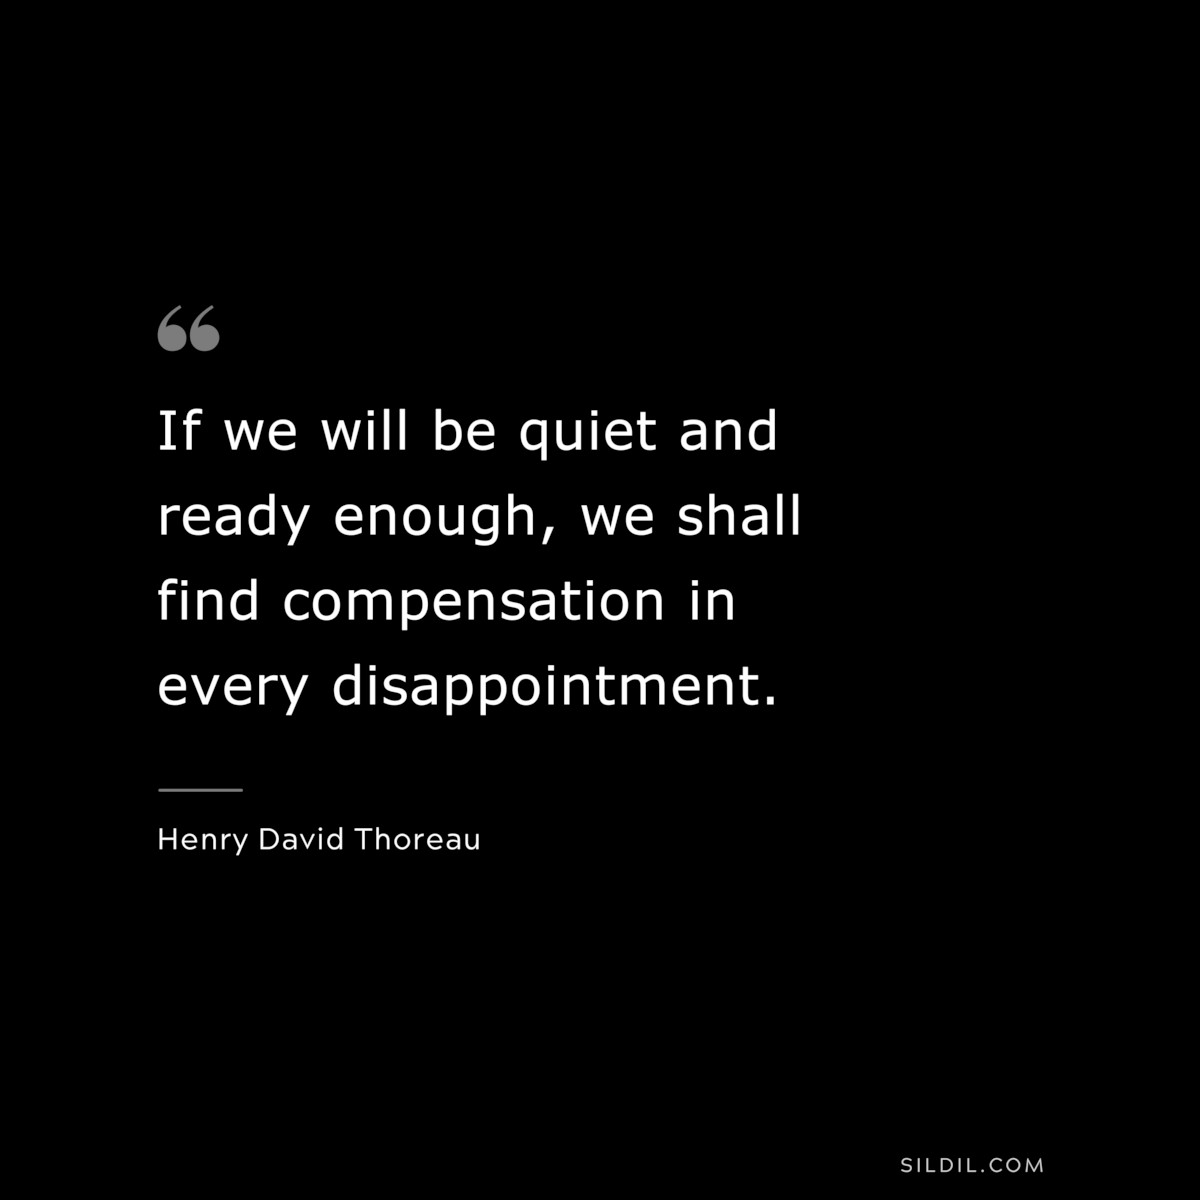 If we will be quiet and ready enough, we shall find compensation in every disappointment. — Henry David Thoreau